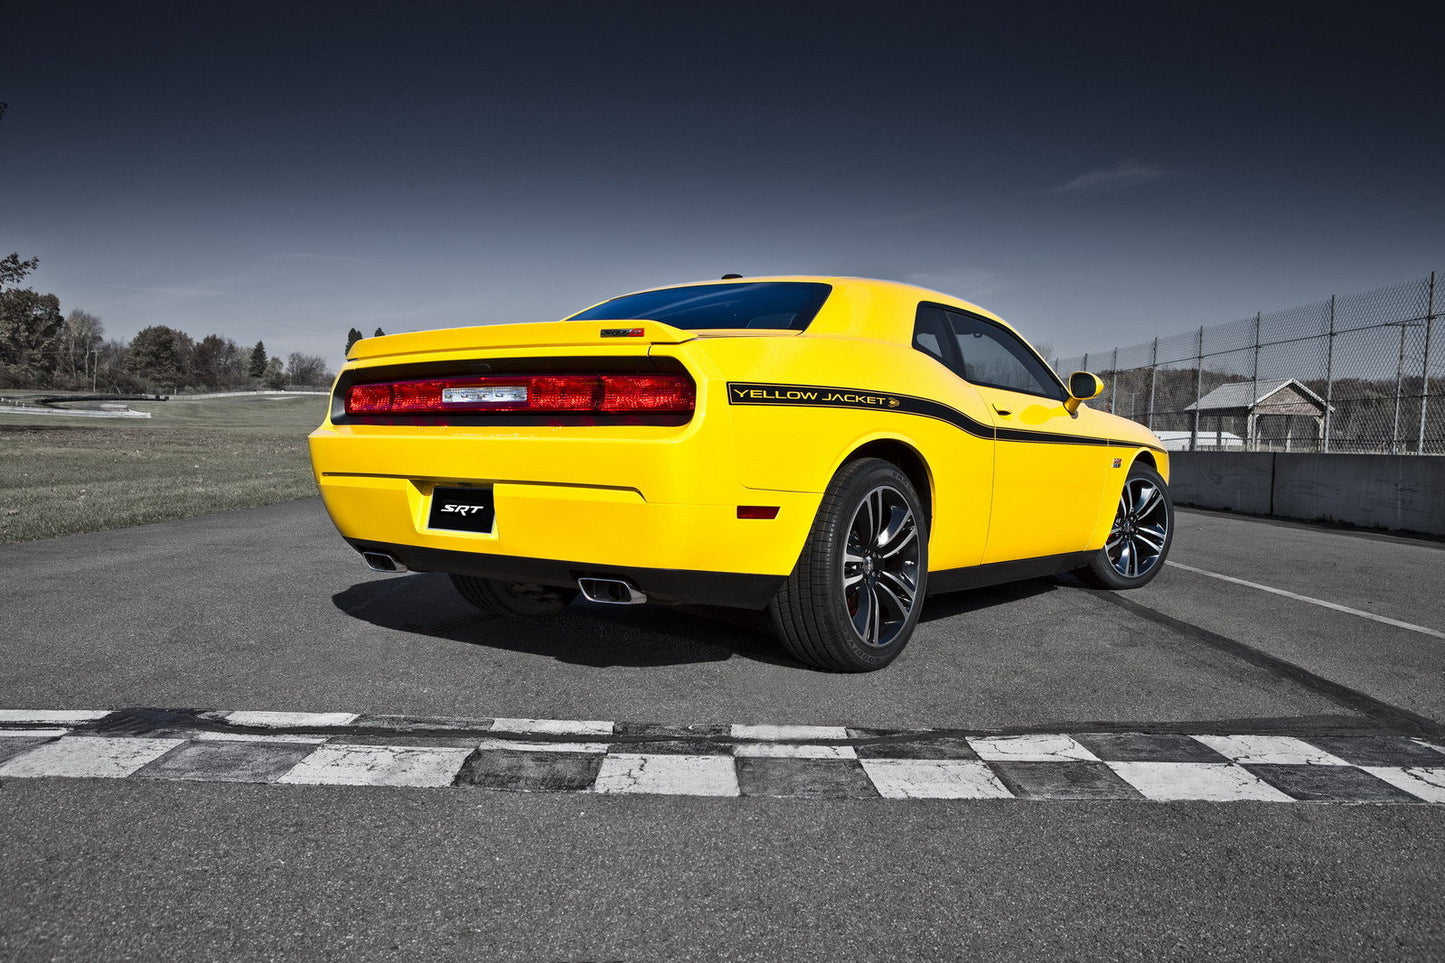 2008 - 2023 DODGE CHALLENGER YELLOW JACKET FACTORY STYLE BODY SIDE STRIPE KIT